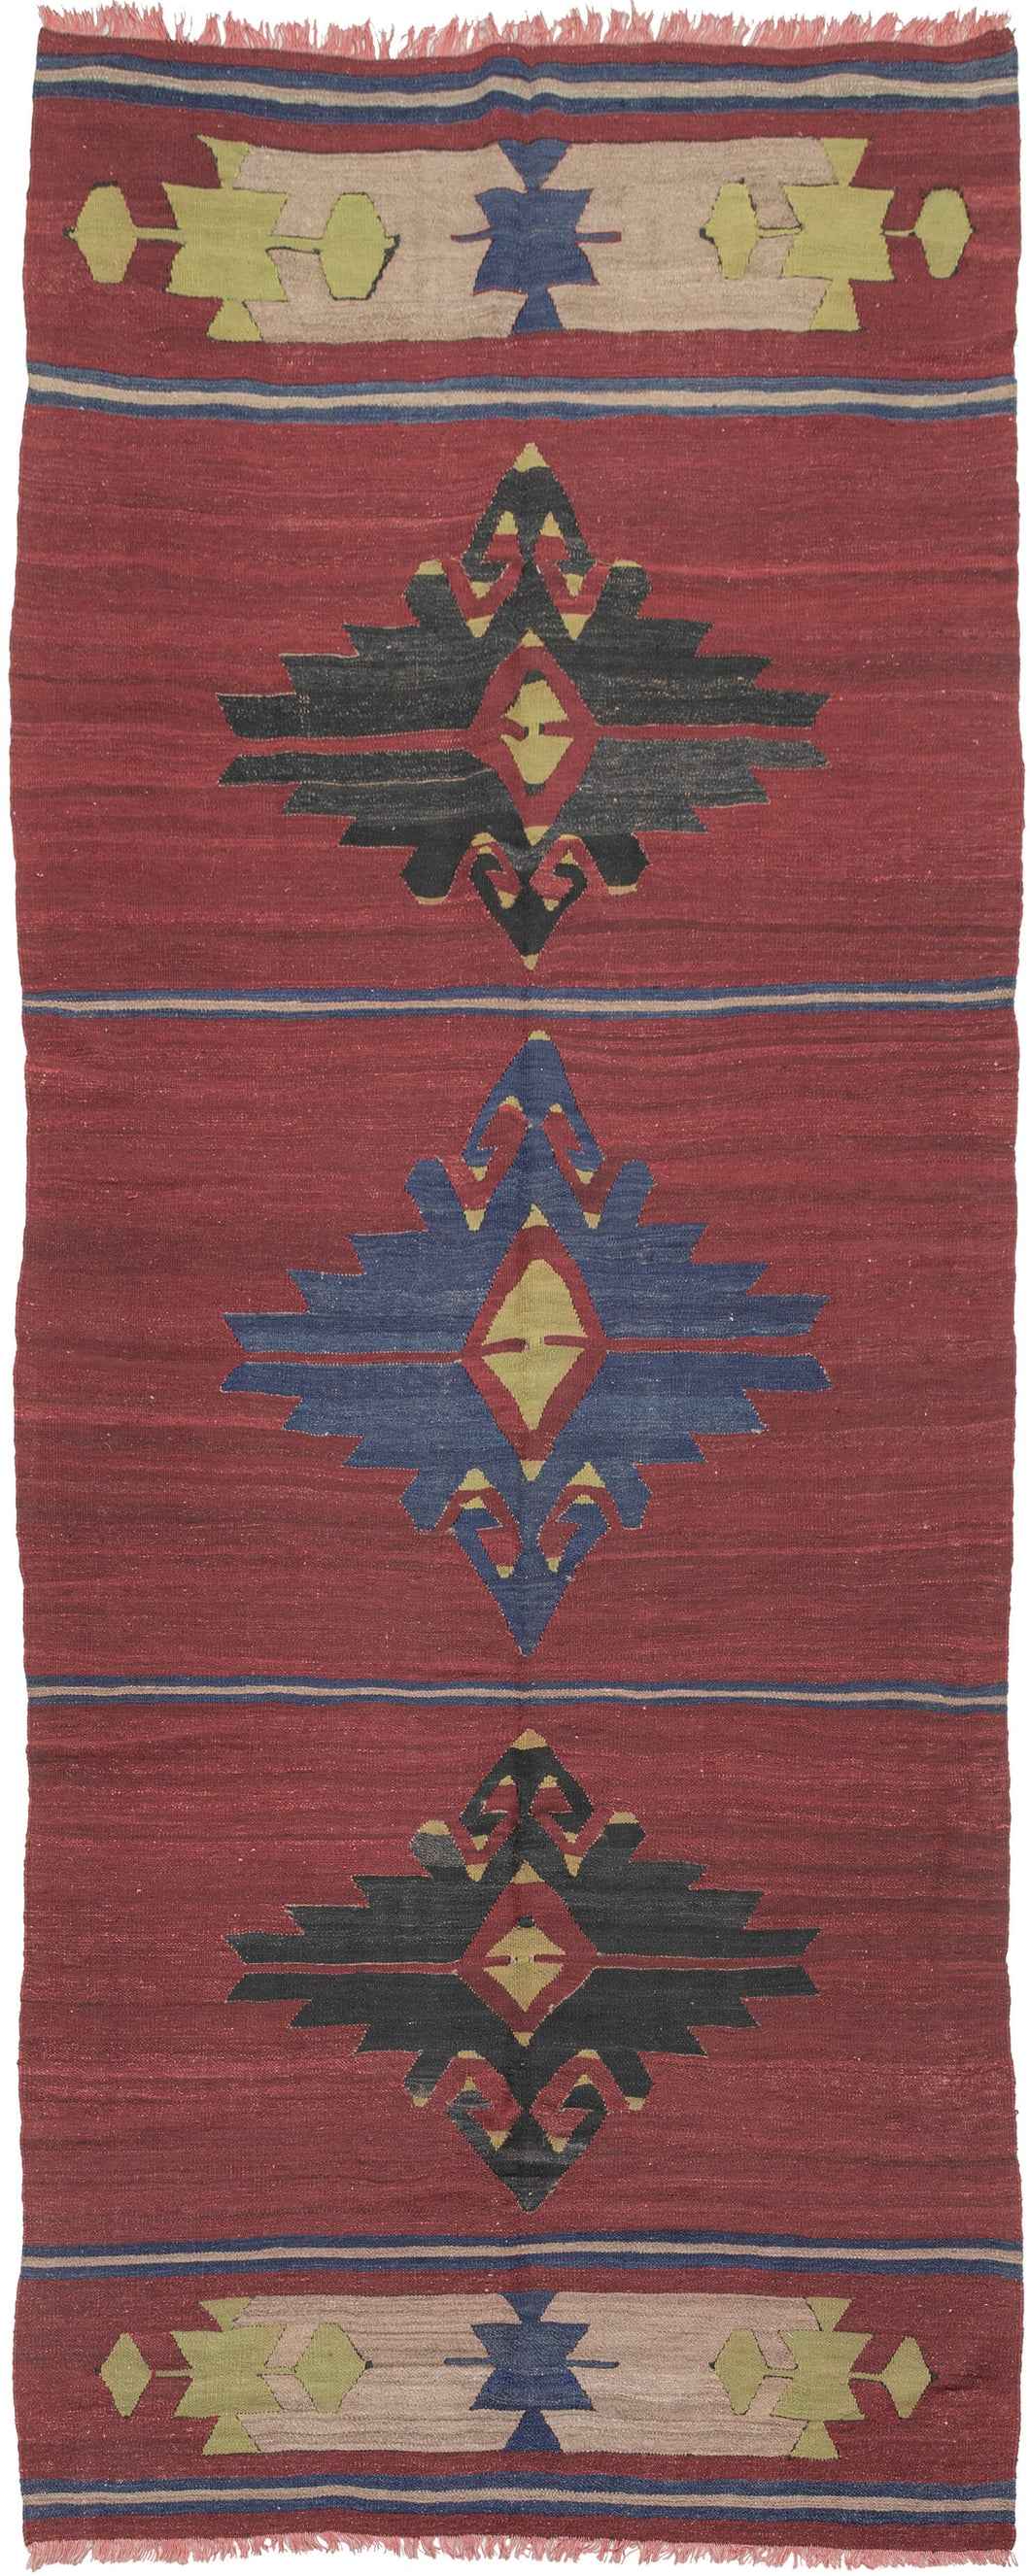 Anatolian kilim that features a simple yet striking composition. The kilim is borderless and broken into five horizontal sections separated by thin blue and tan stripes on a dramatic dark raspberry field. The top and bottom sections are composed of matching cartouche like devices in chartruese, tan and periwinkle. The inner panels feature three graphic hooked medallions; the central periwinkle medallion flanked by two darker black medallions.